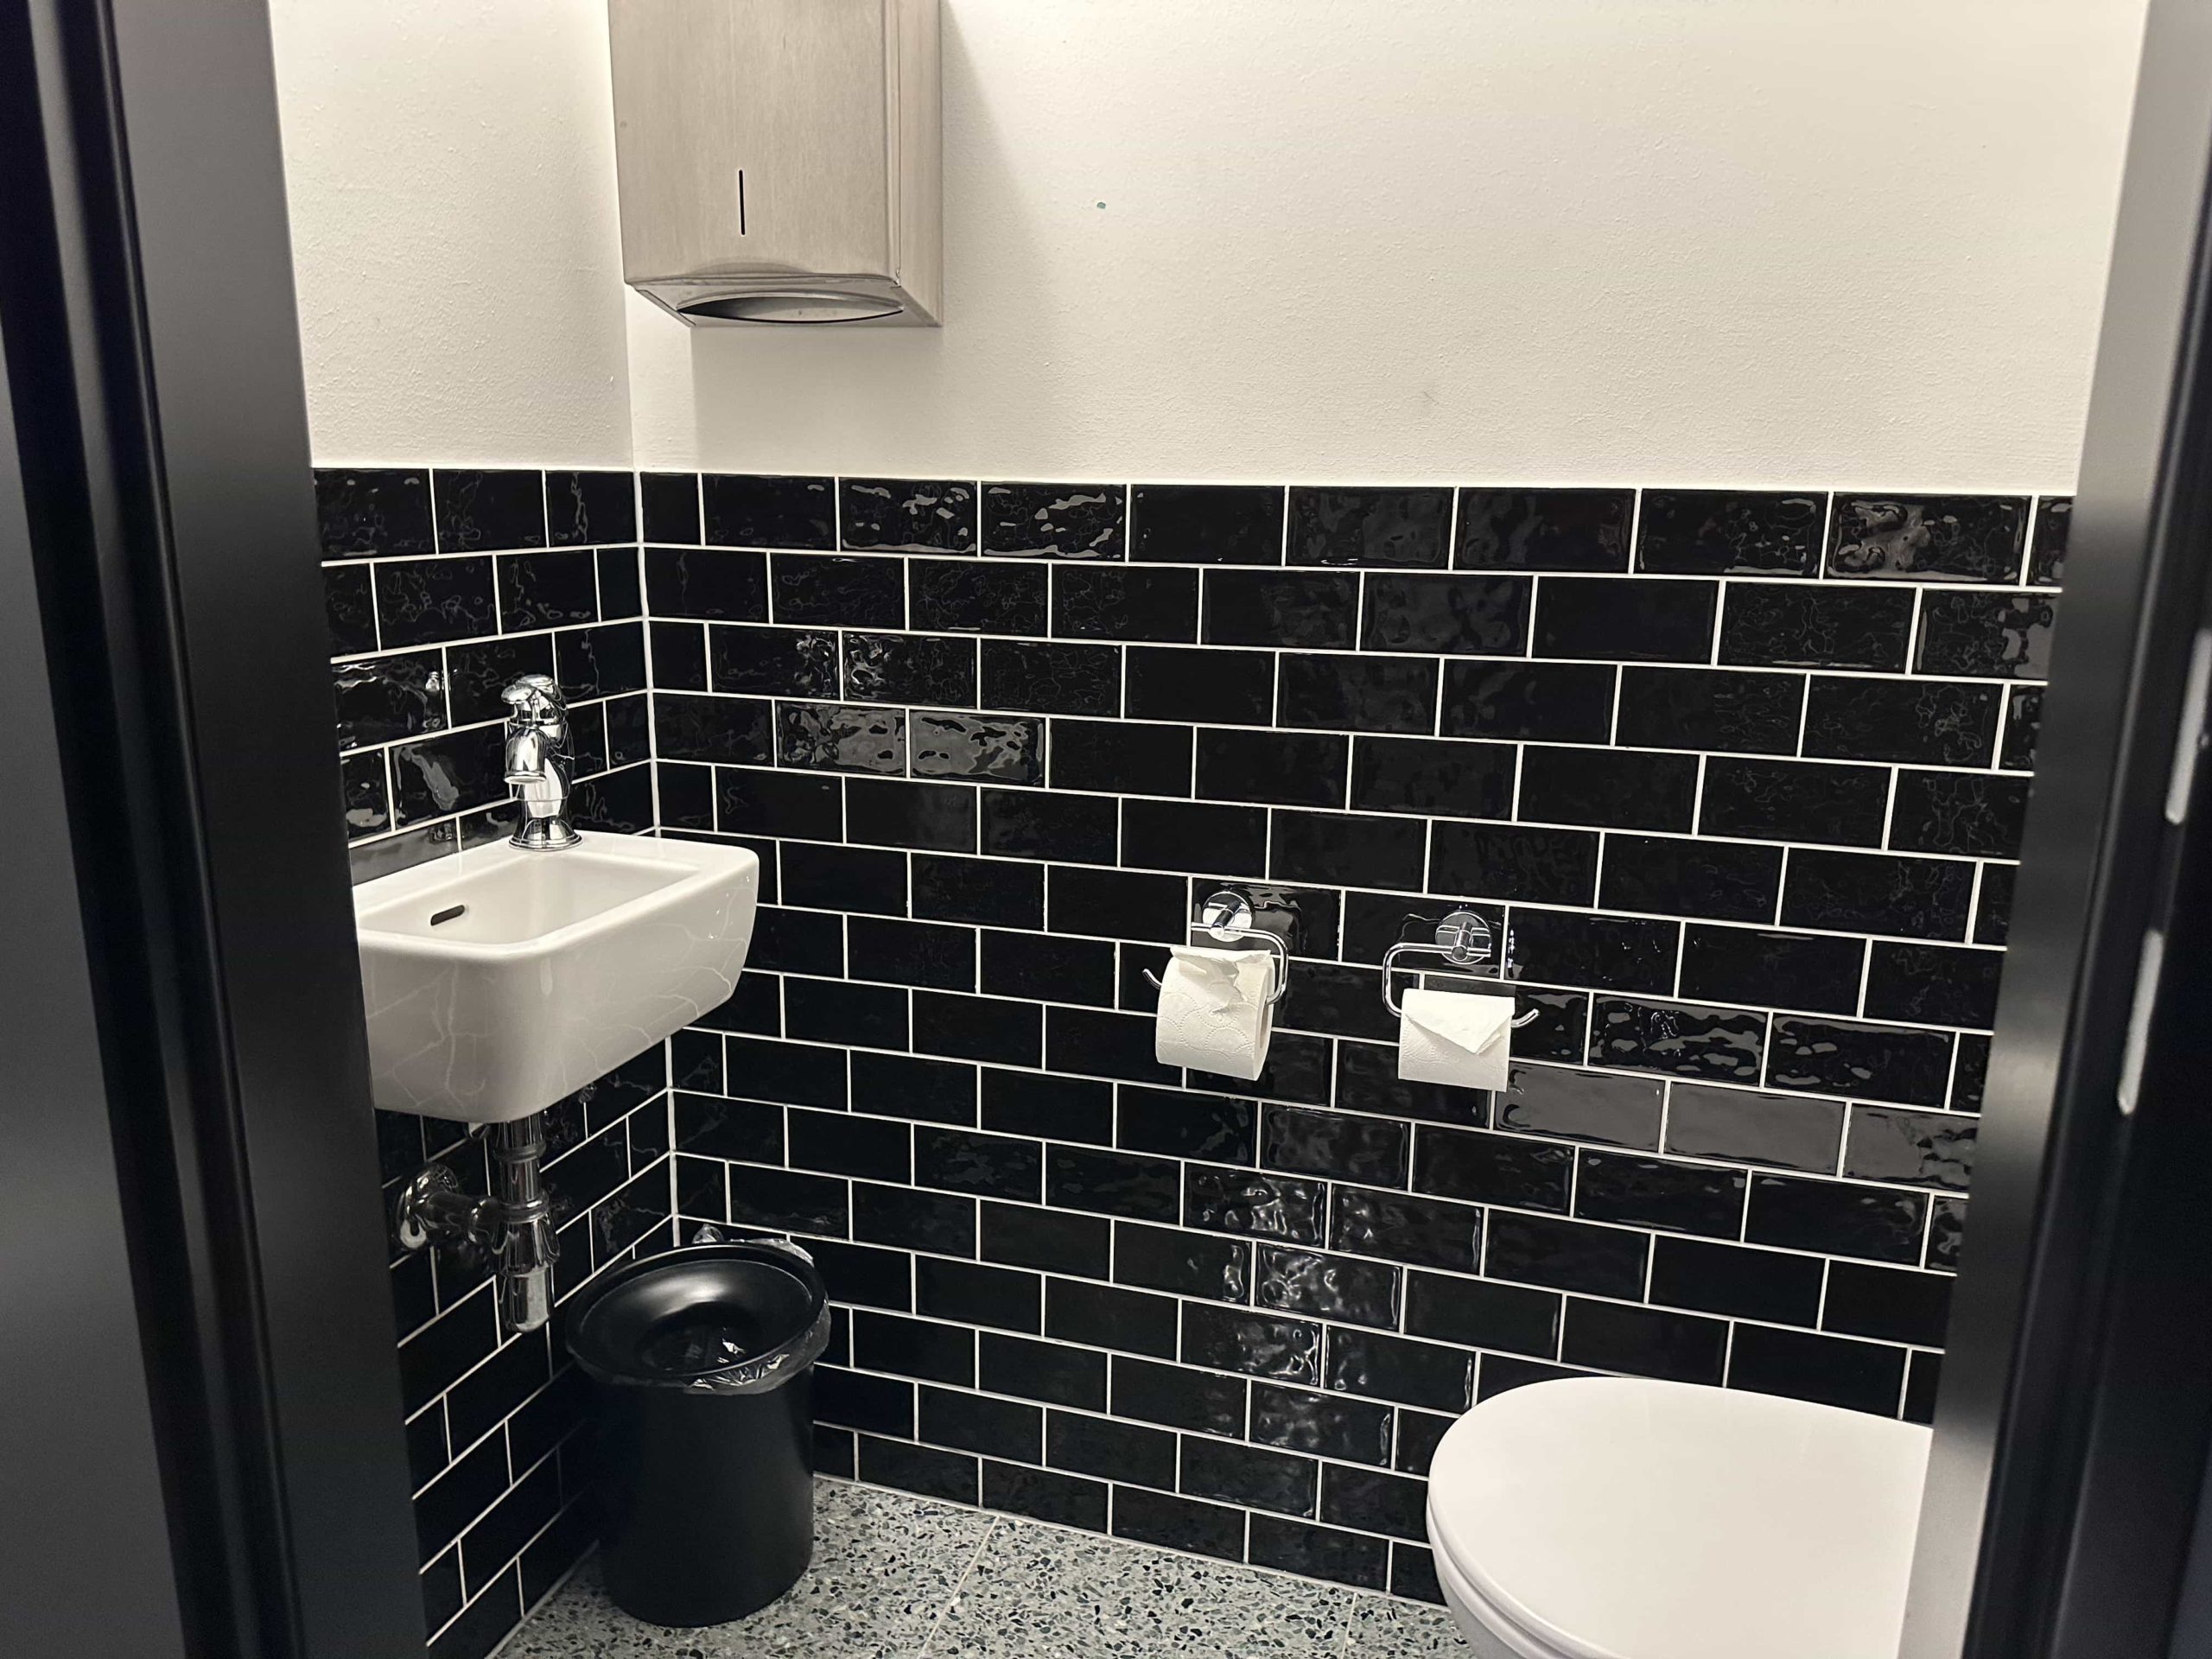 A toilet room (WC), with a toilet, small sink, and paper towel dispenser 